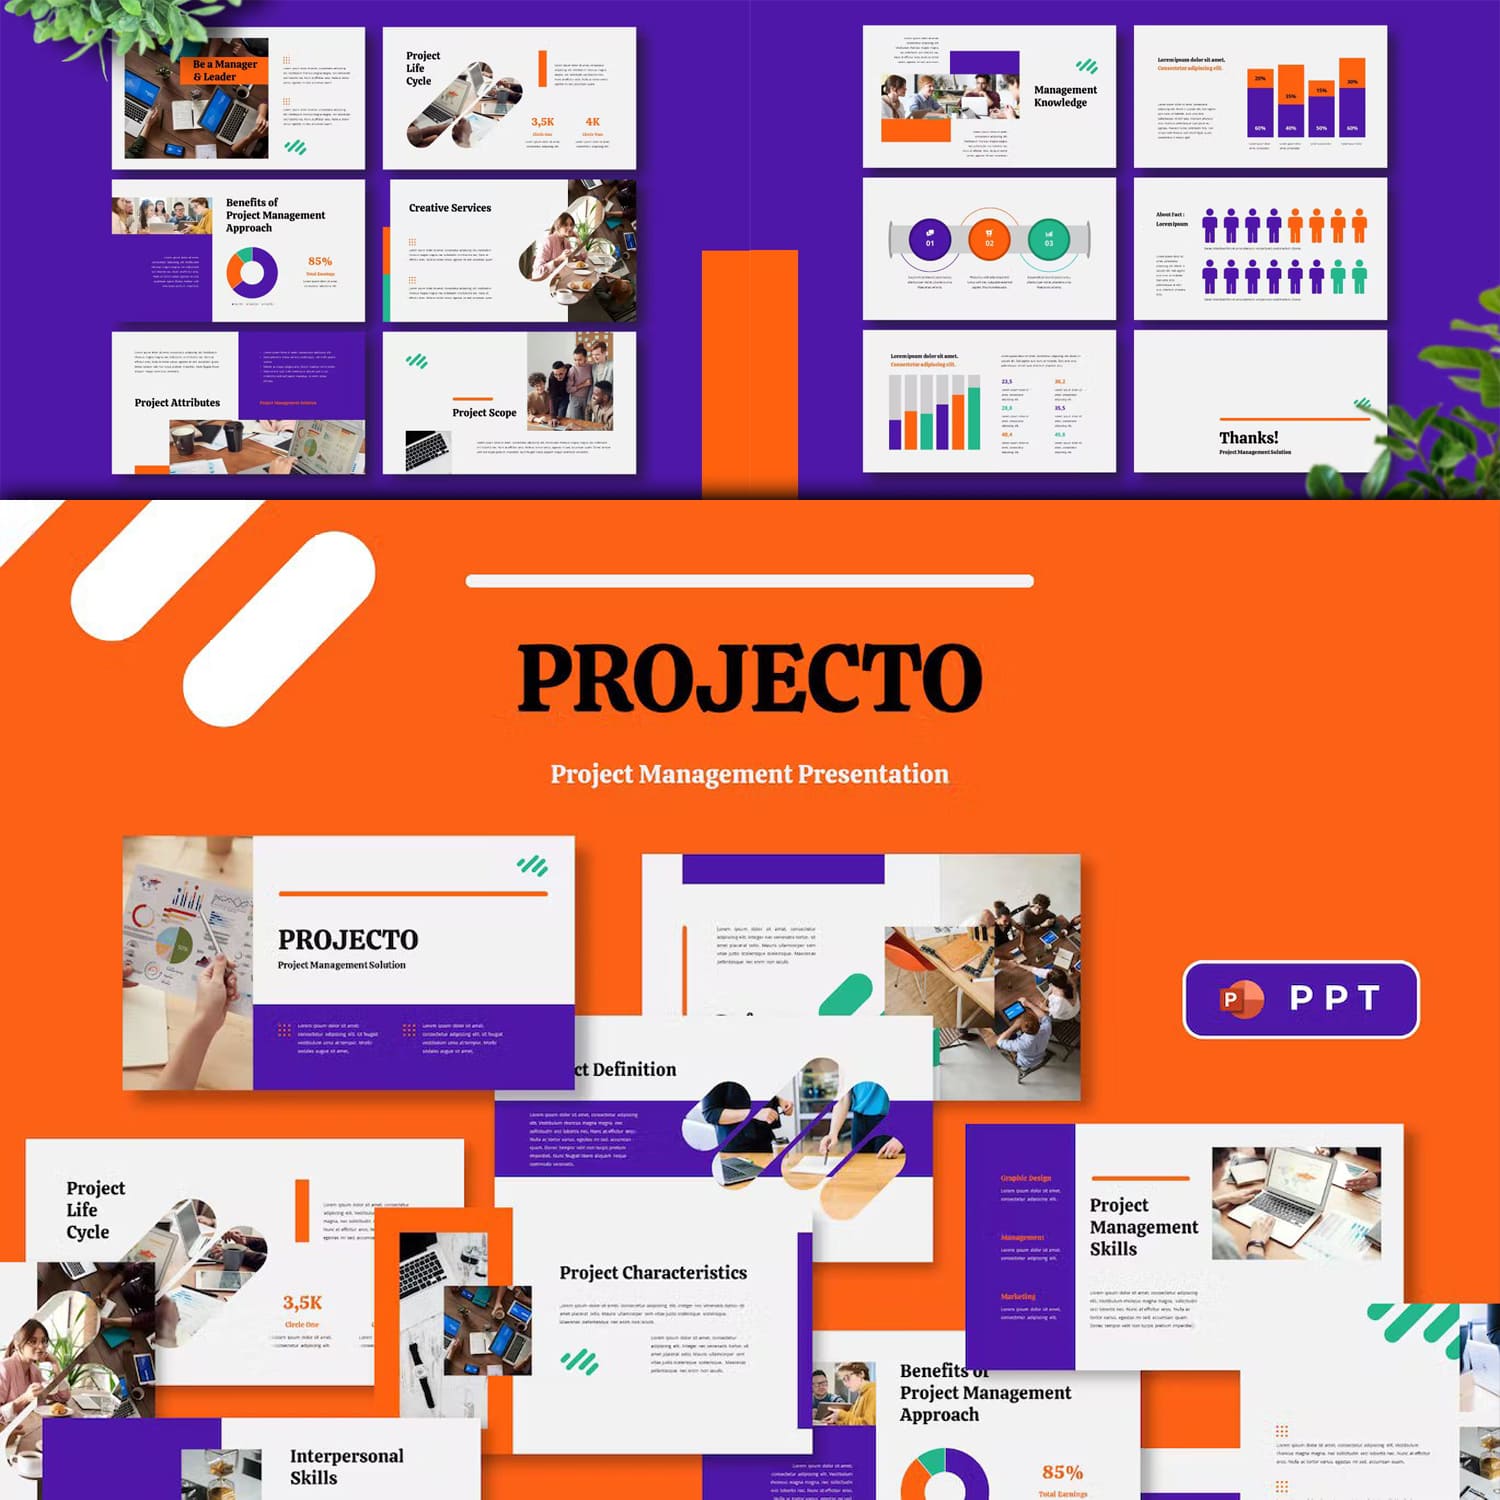 Projecto project management powerpoint template from inipagi.